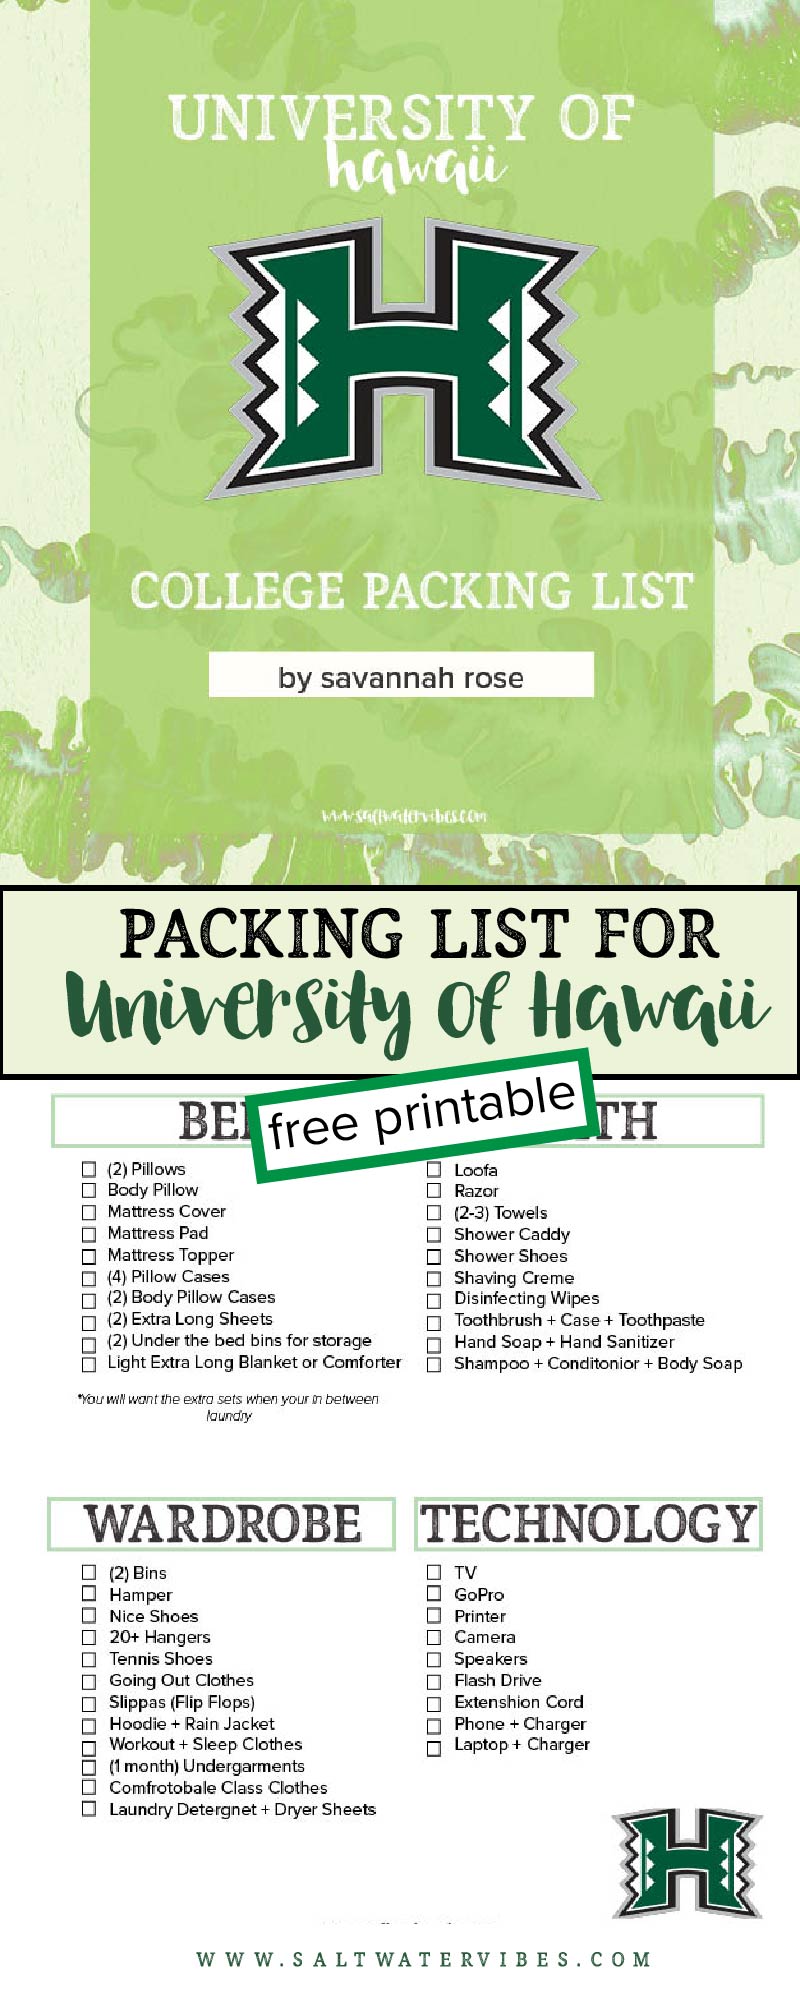 Everything You Need to Know About University of Hawaii at Manoa + Free Printable College Packing Checking List + SaltWaterVibes